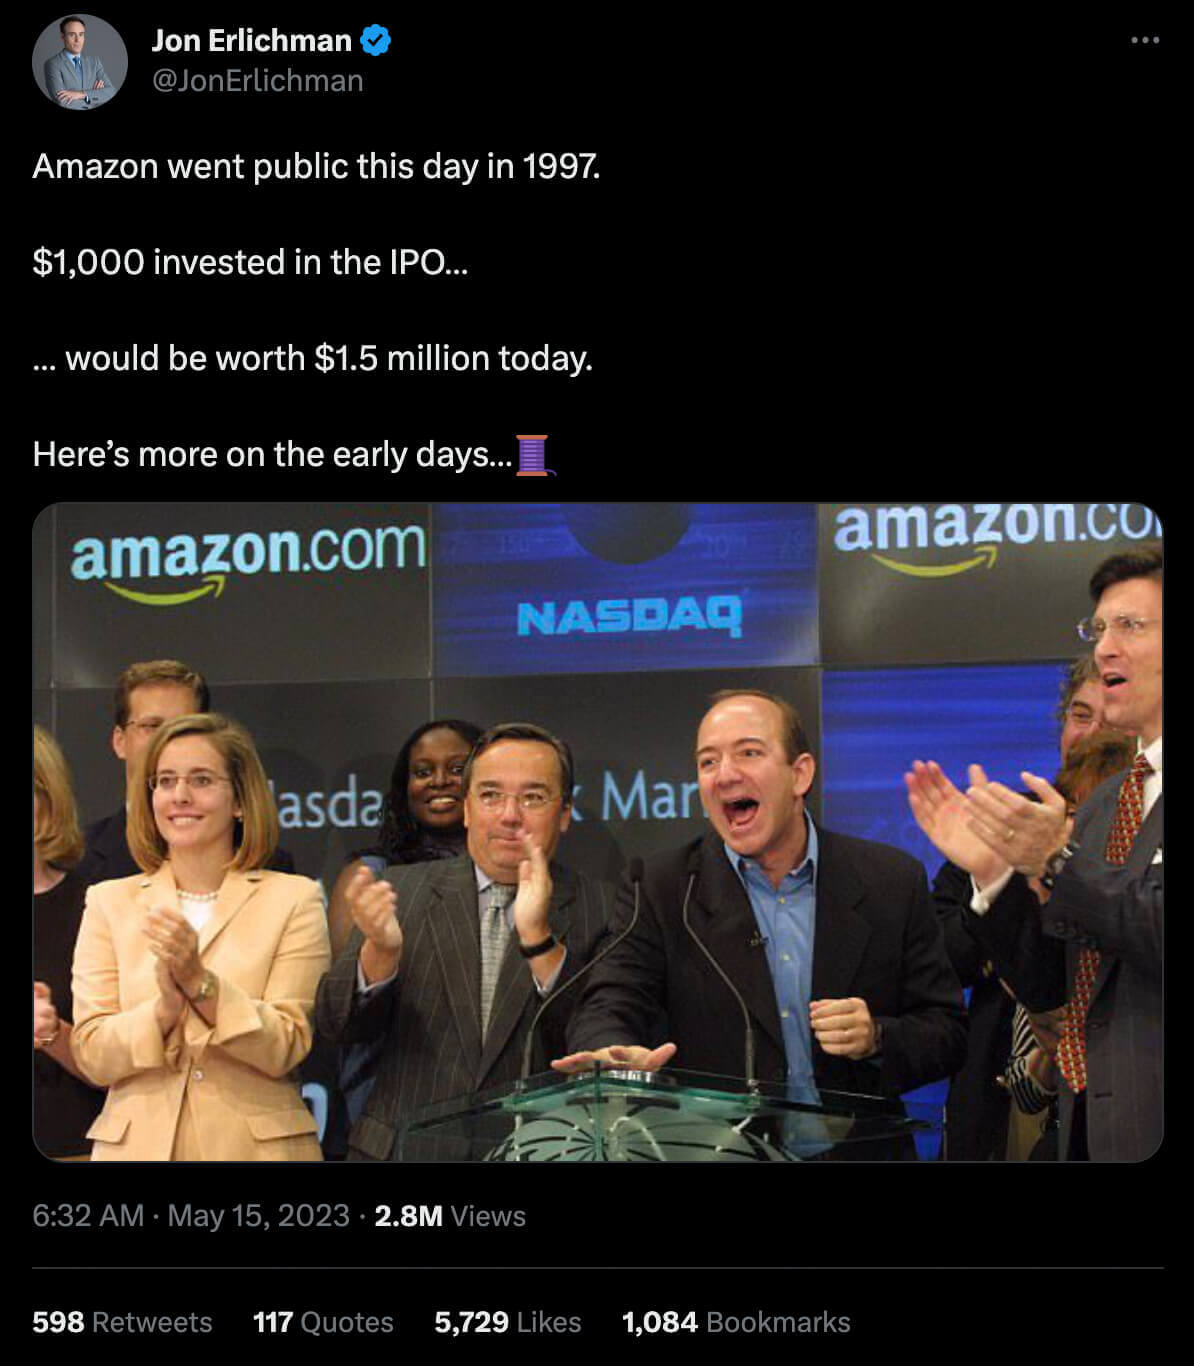 Tweet about Amazon's IPO in 1997